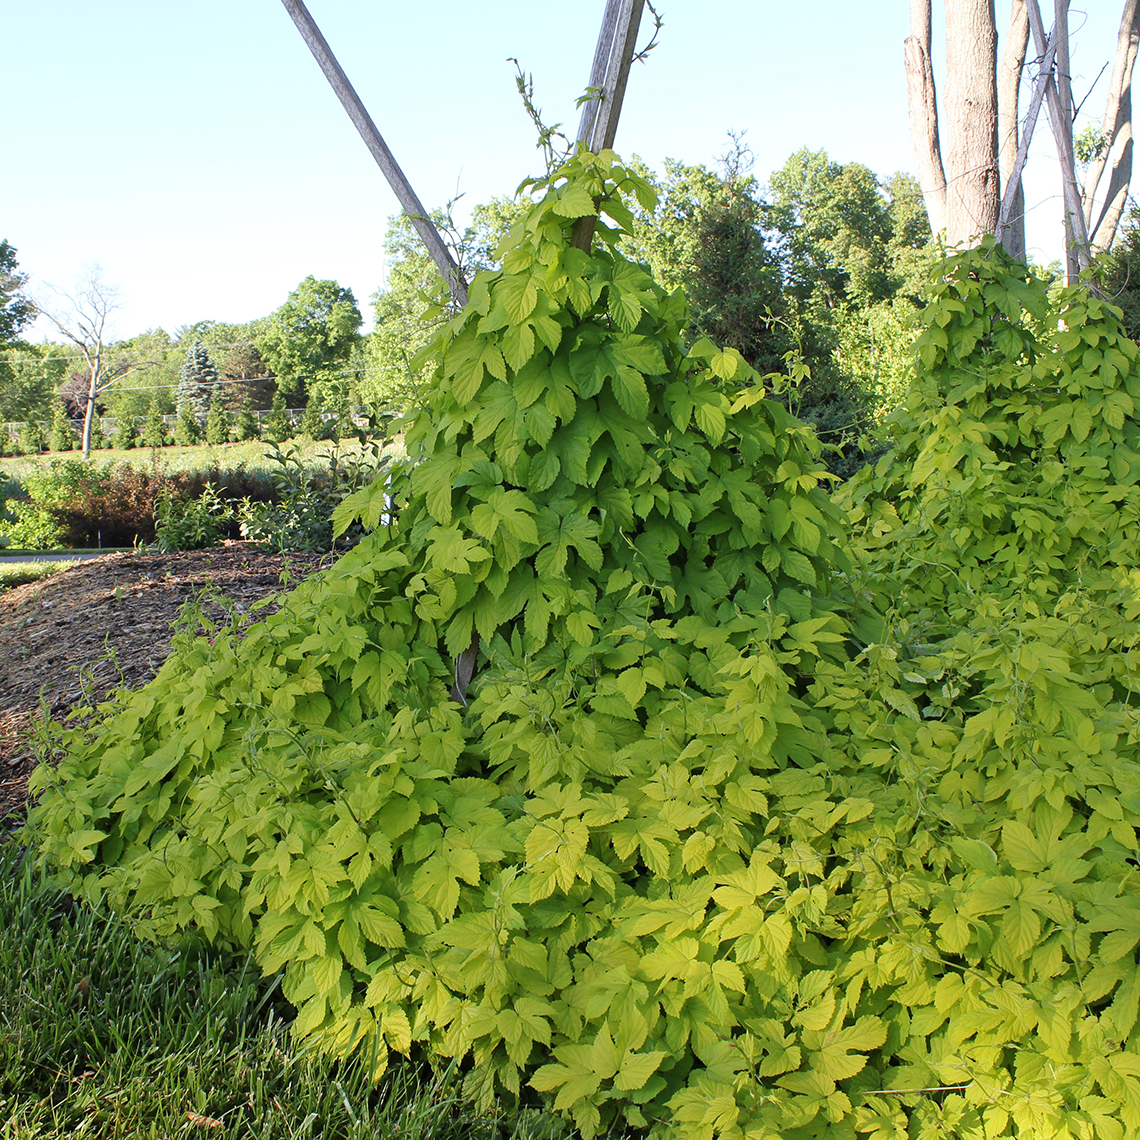 Yellow leafed Summer Shandy hop vine growing on a tripod of stakes in the landscape